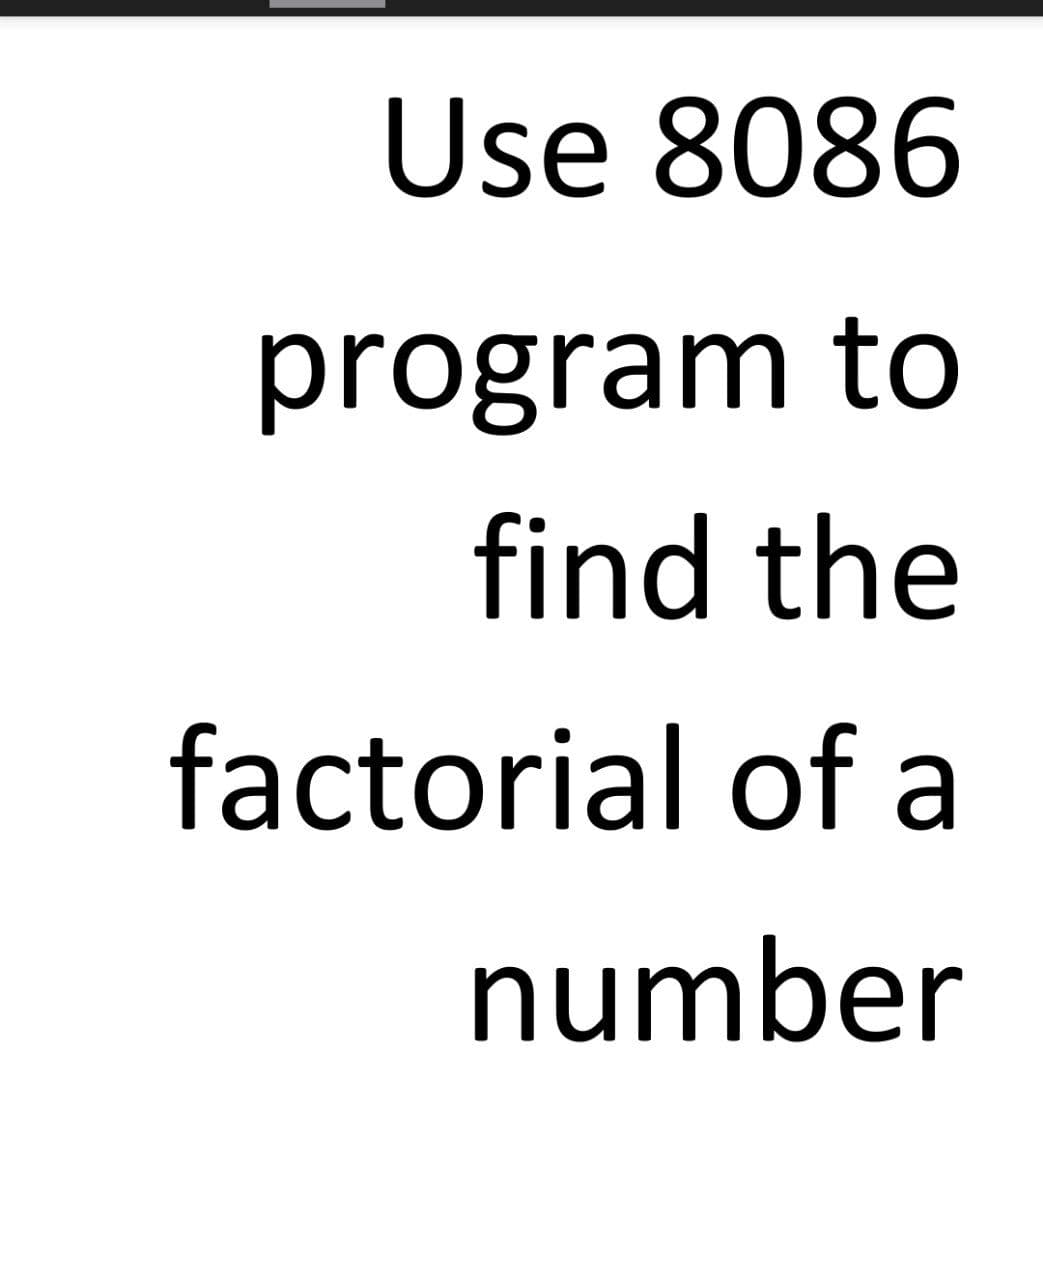 Use 8086
program to
find the
factorial of a
number
